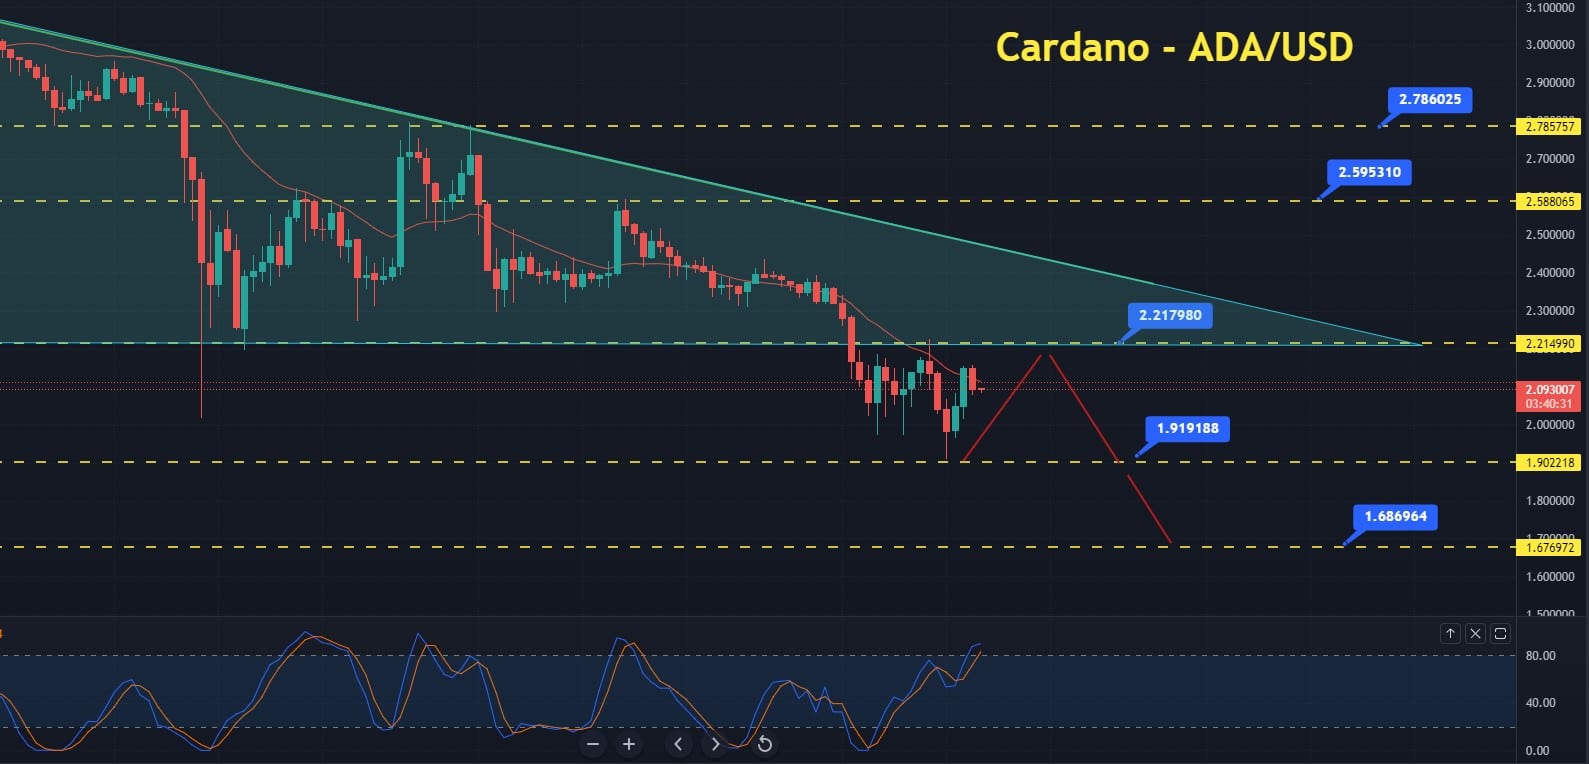 Cardano Plunged to $2.08